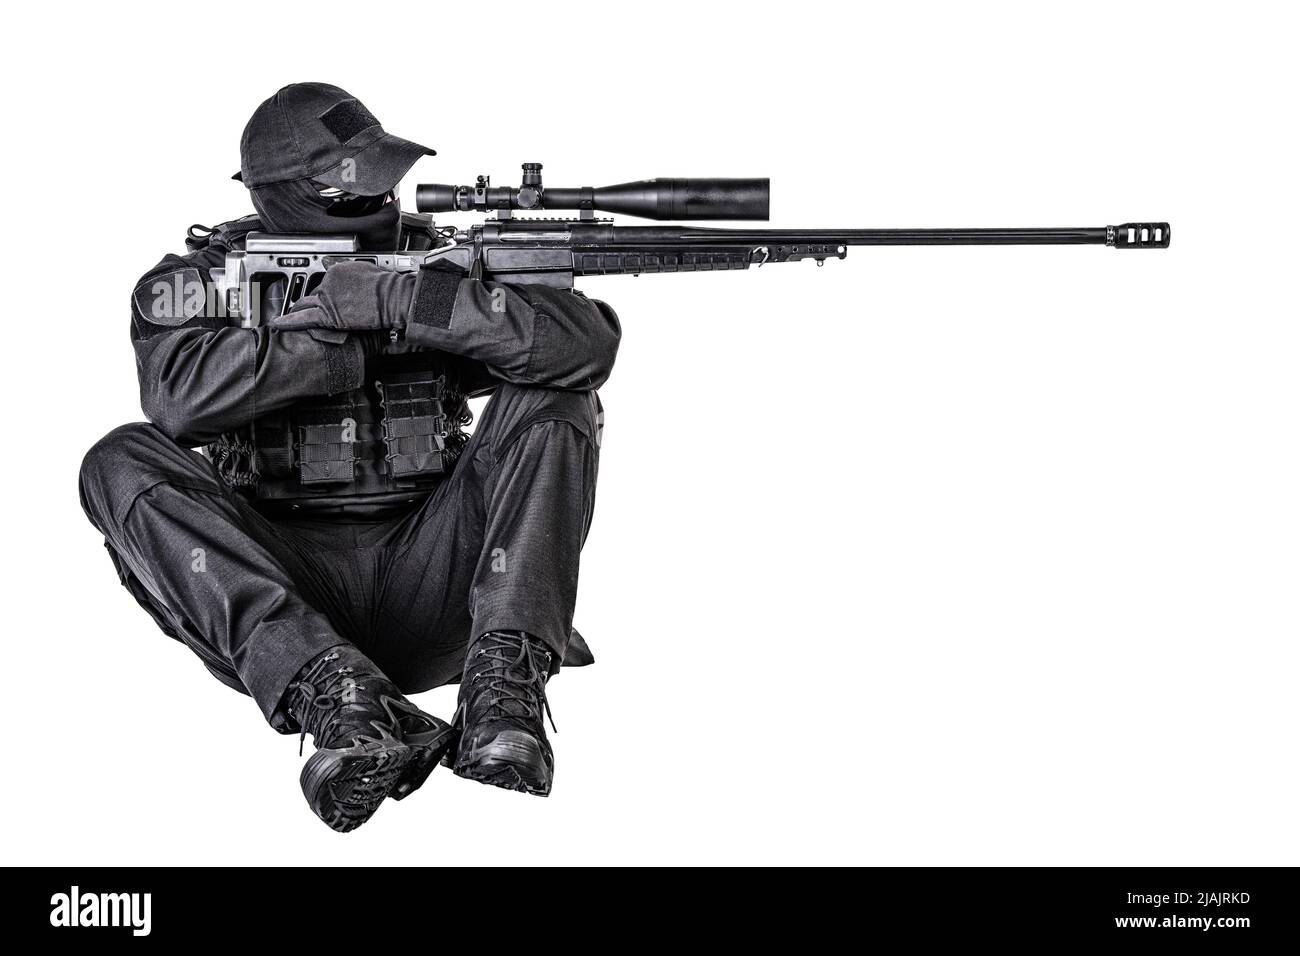 SWAT team sniper sitting and aiming with sniper rifle equipped telescopic optical sight. Stock Photo